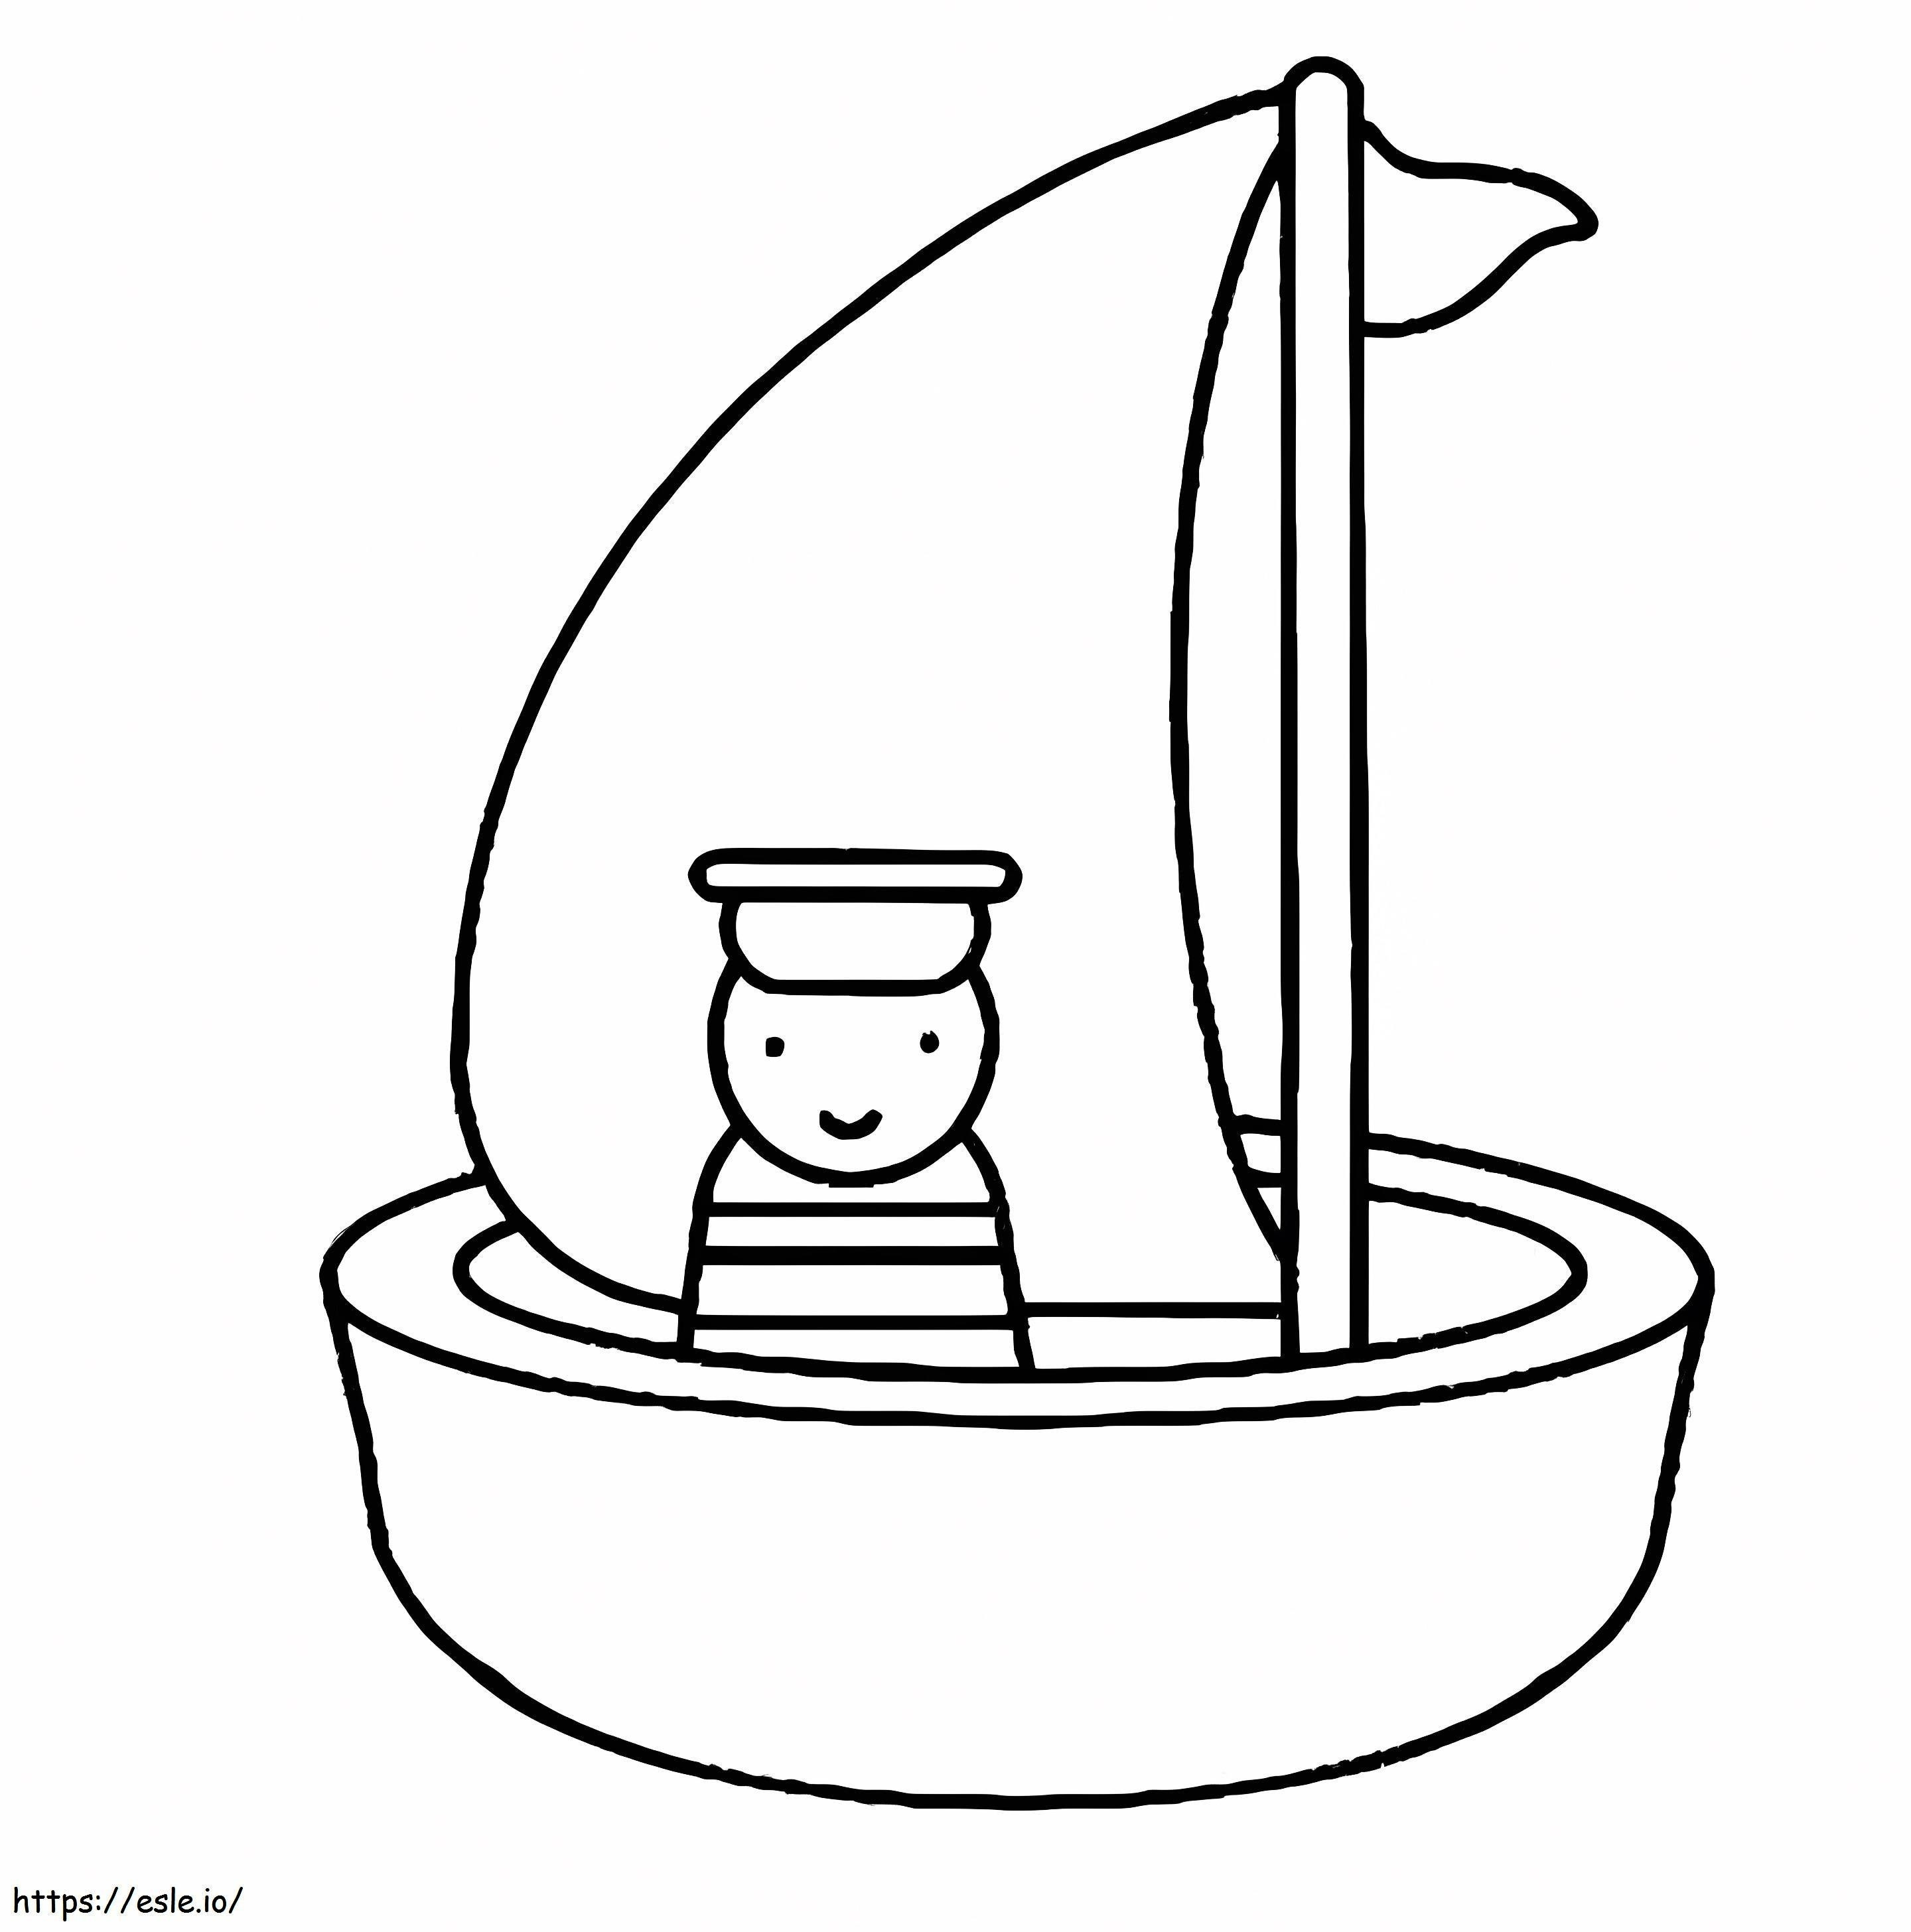 Cute Sailor On Sailboat coloring page